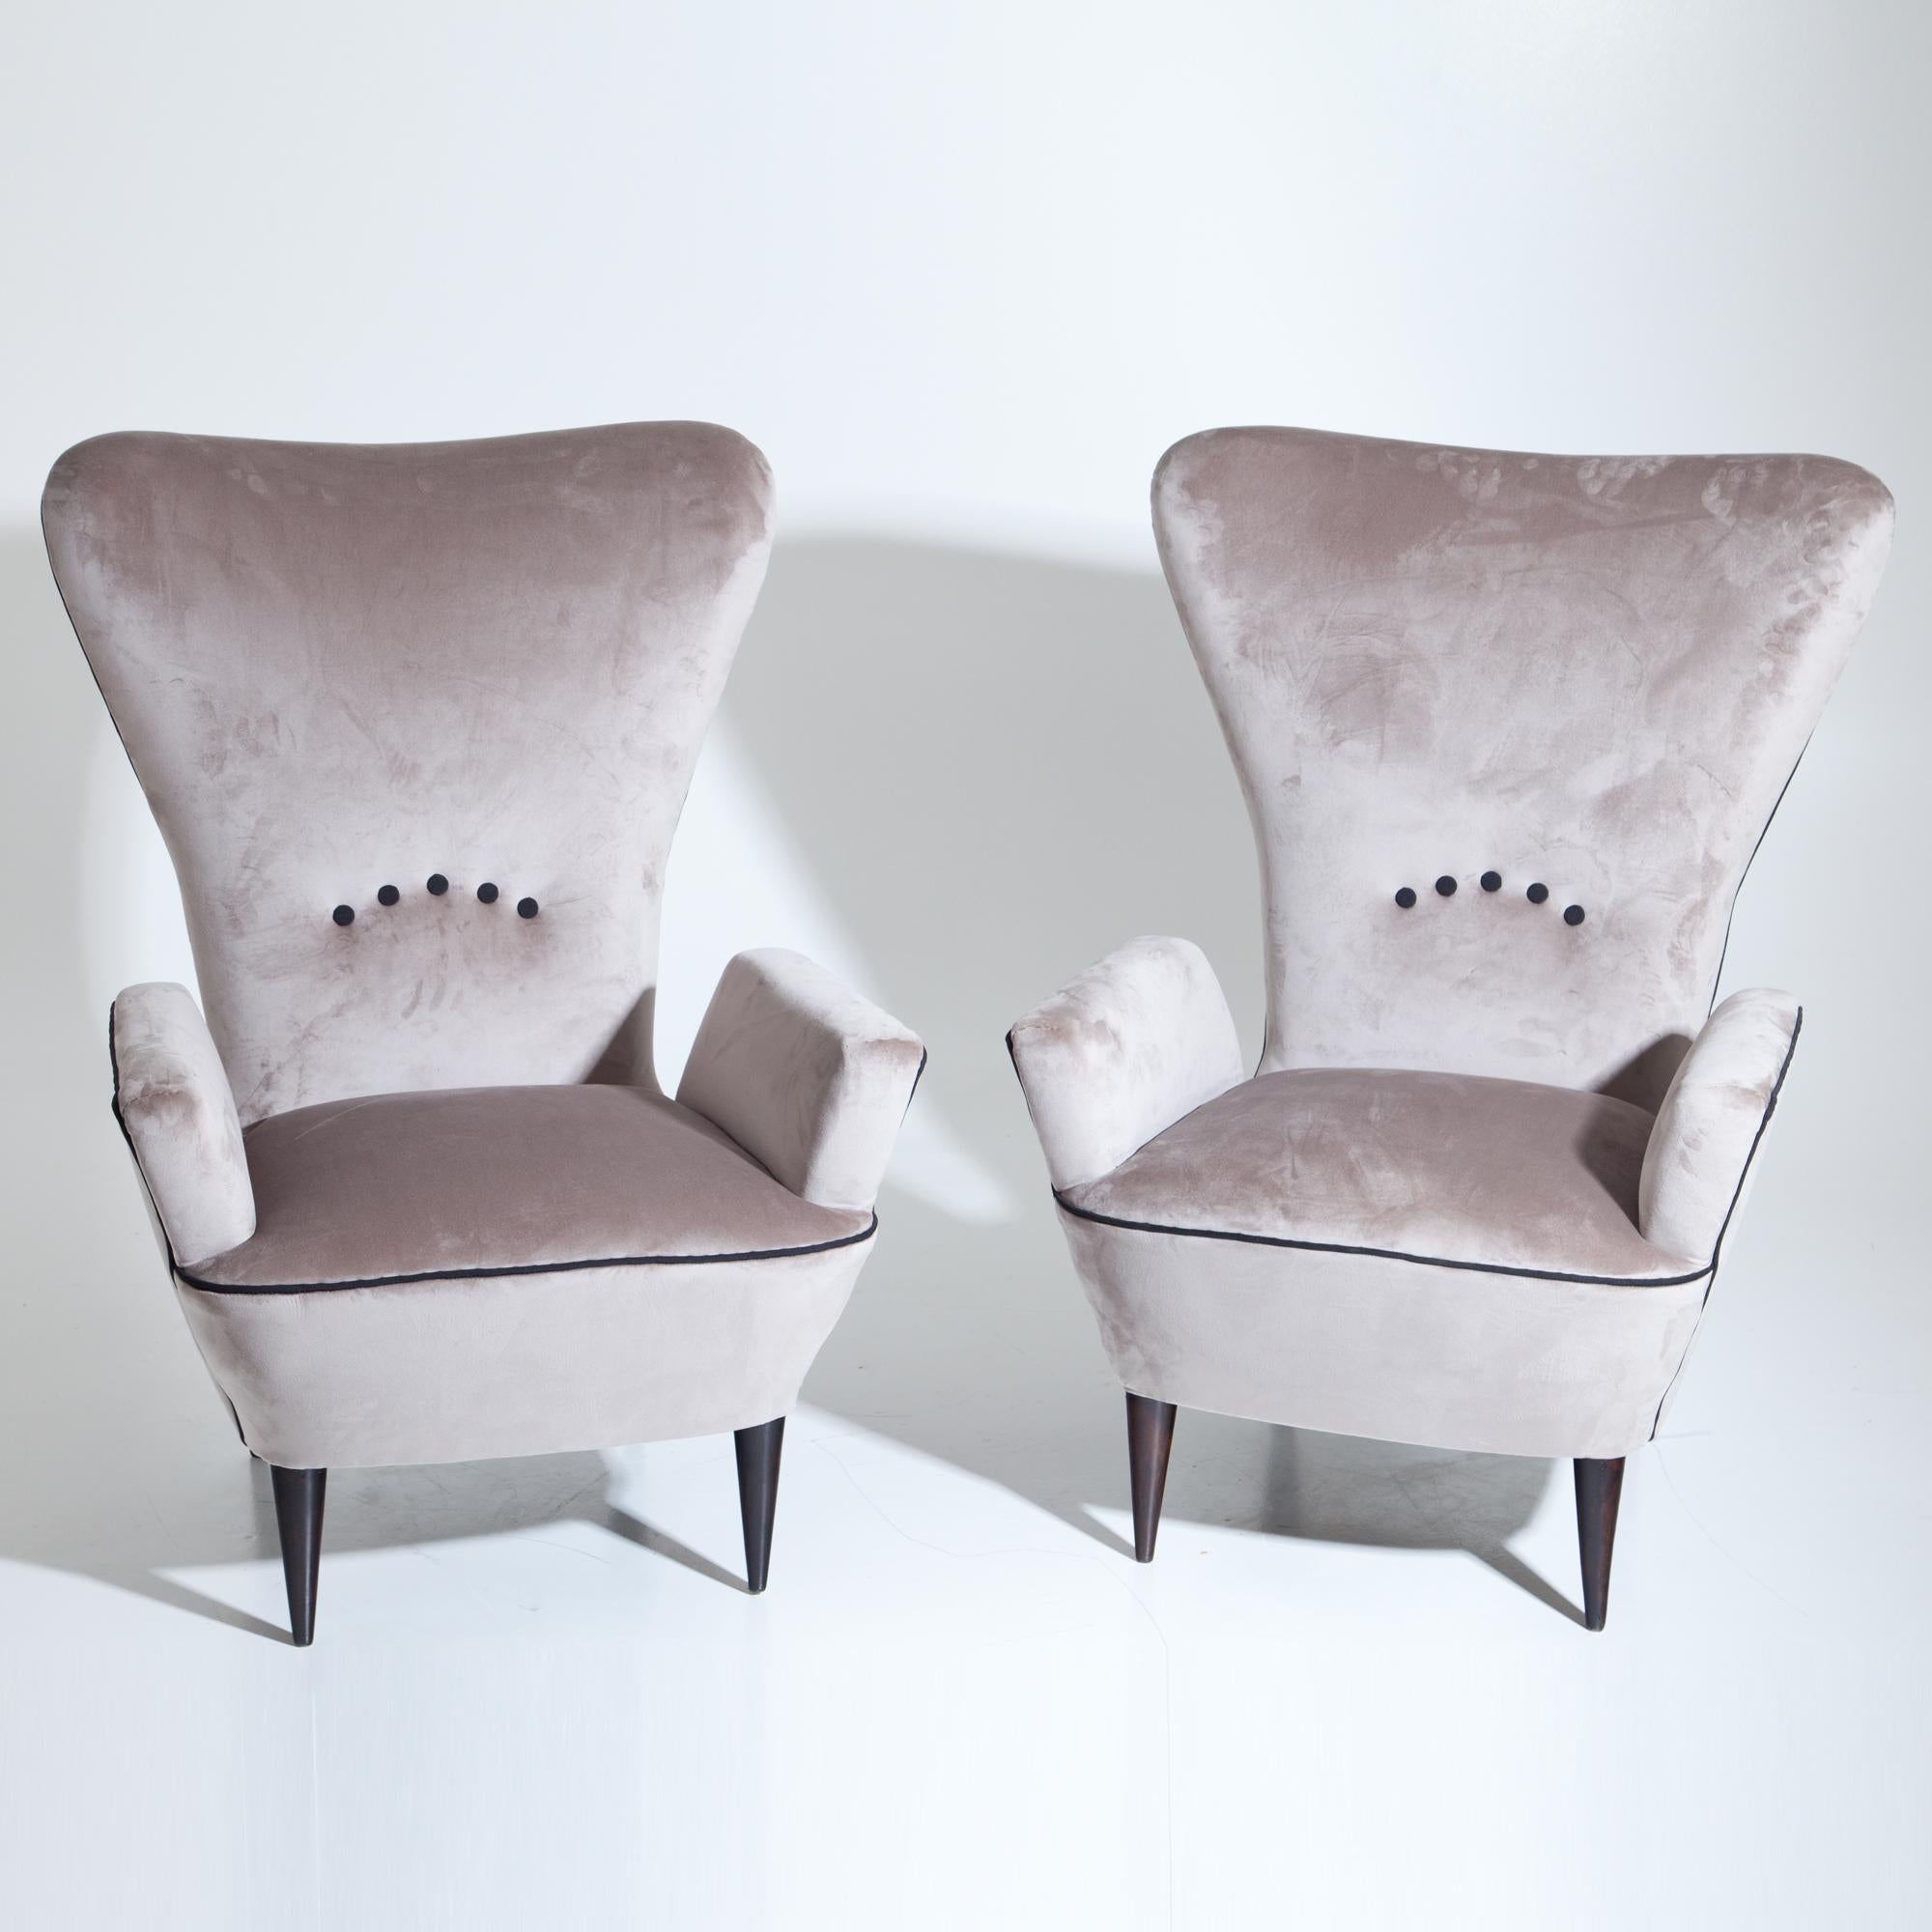 Pair of midcentury lounge chairs, attributed to Paolo Buffa, standing on conical black feet with a trapezoidal, tall backrest and armrest that descend towards the backrest. The armchairs were reupholstered with a grey high quality fabric.